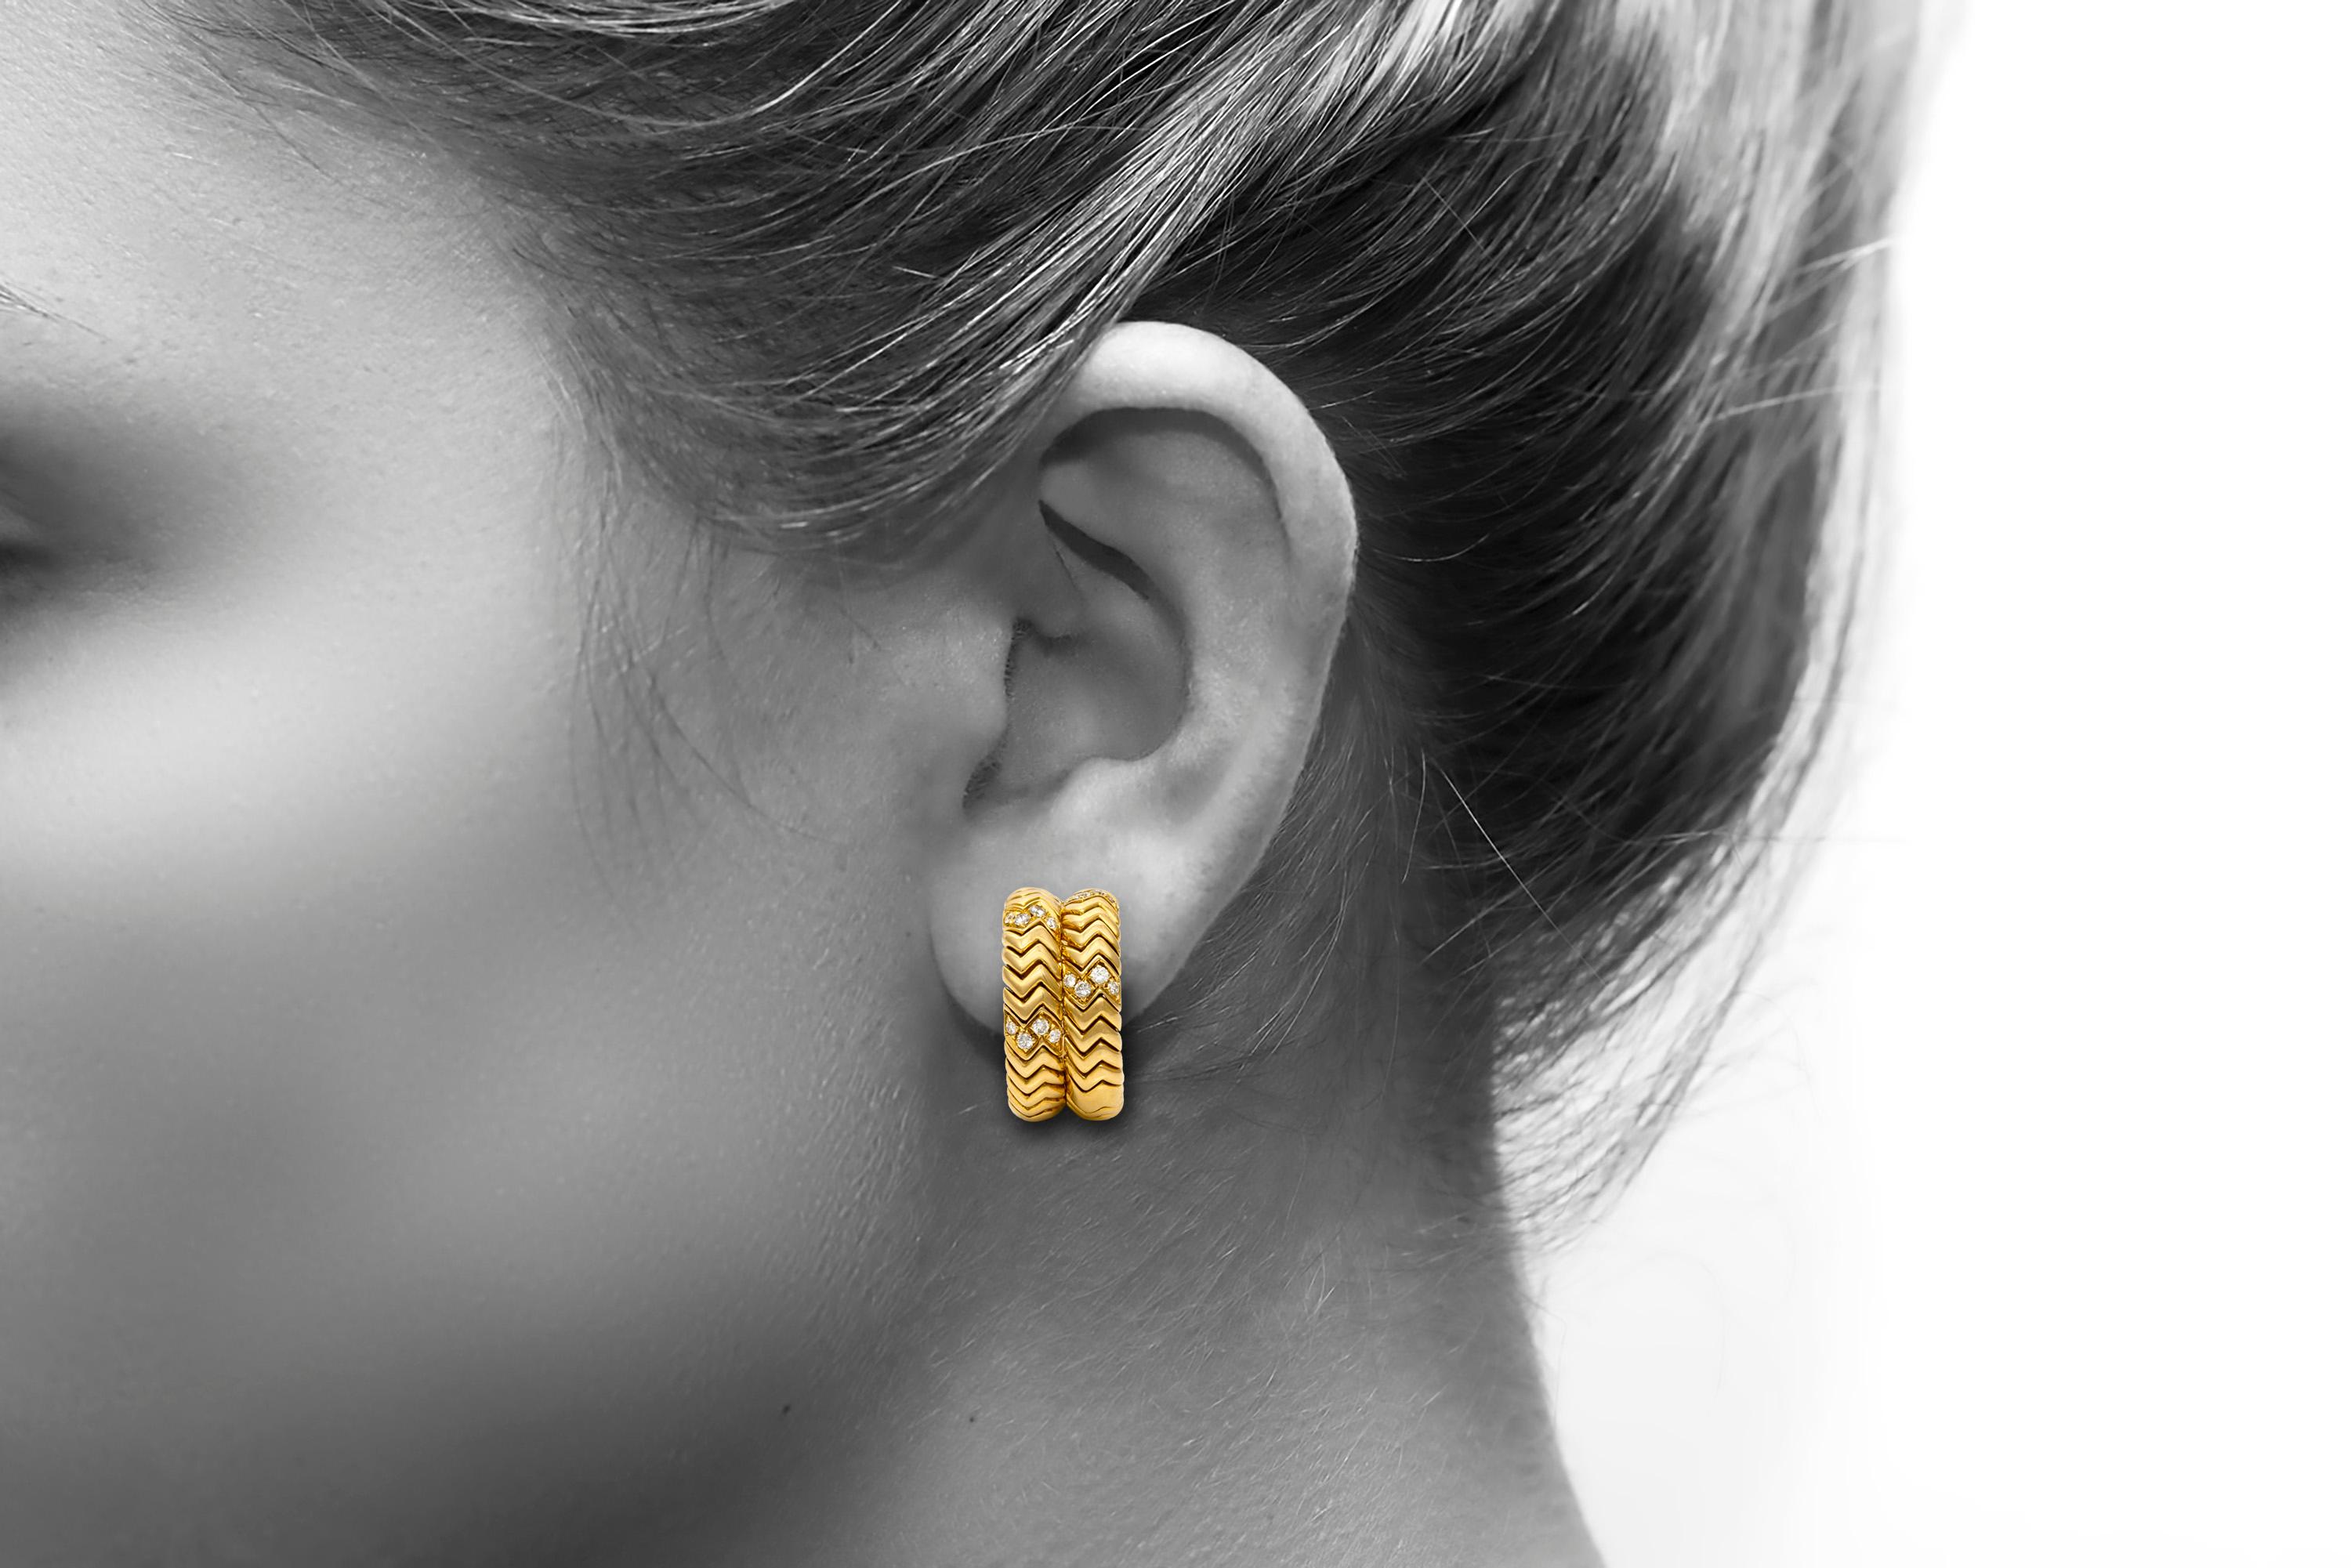 BVLGARI hoop earrings finely crafted in 18k gold and weighing approximately a total of 1.00 carats diamond.
